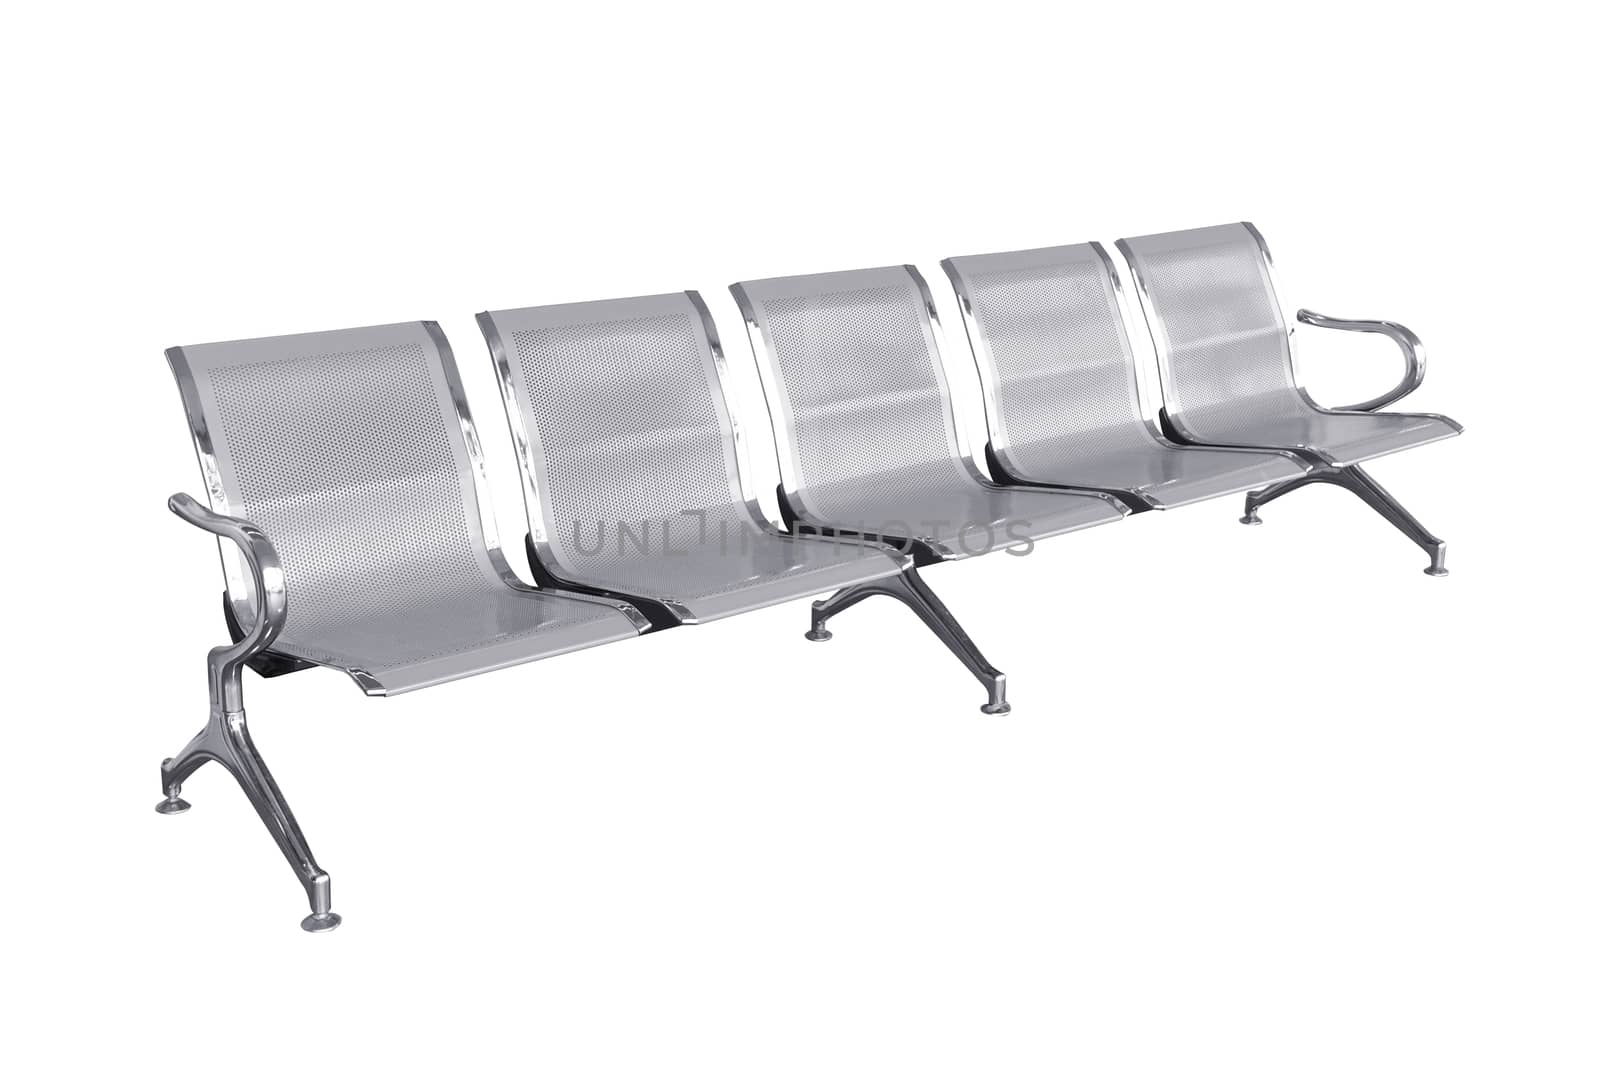 Waiting stainless steel chairs isolated on white background with clipping path.